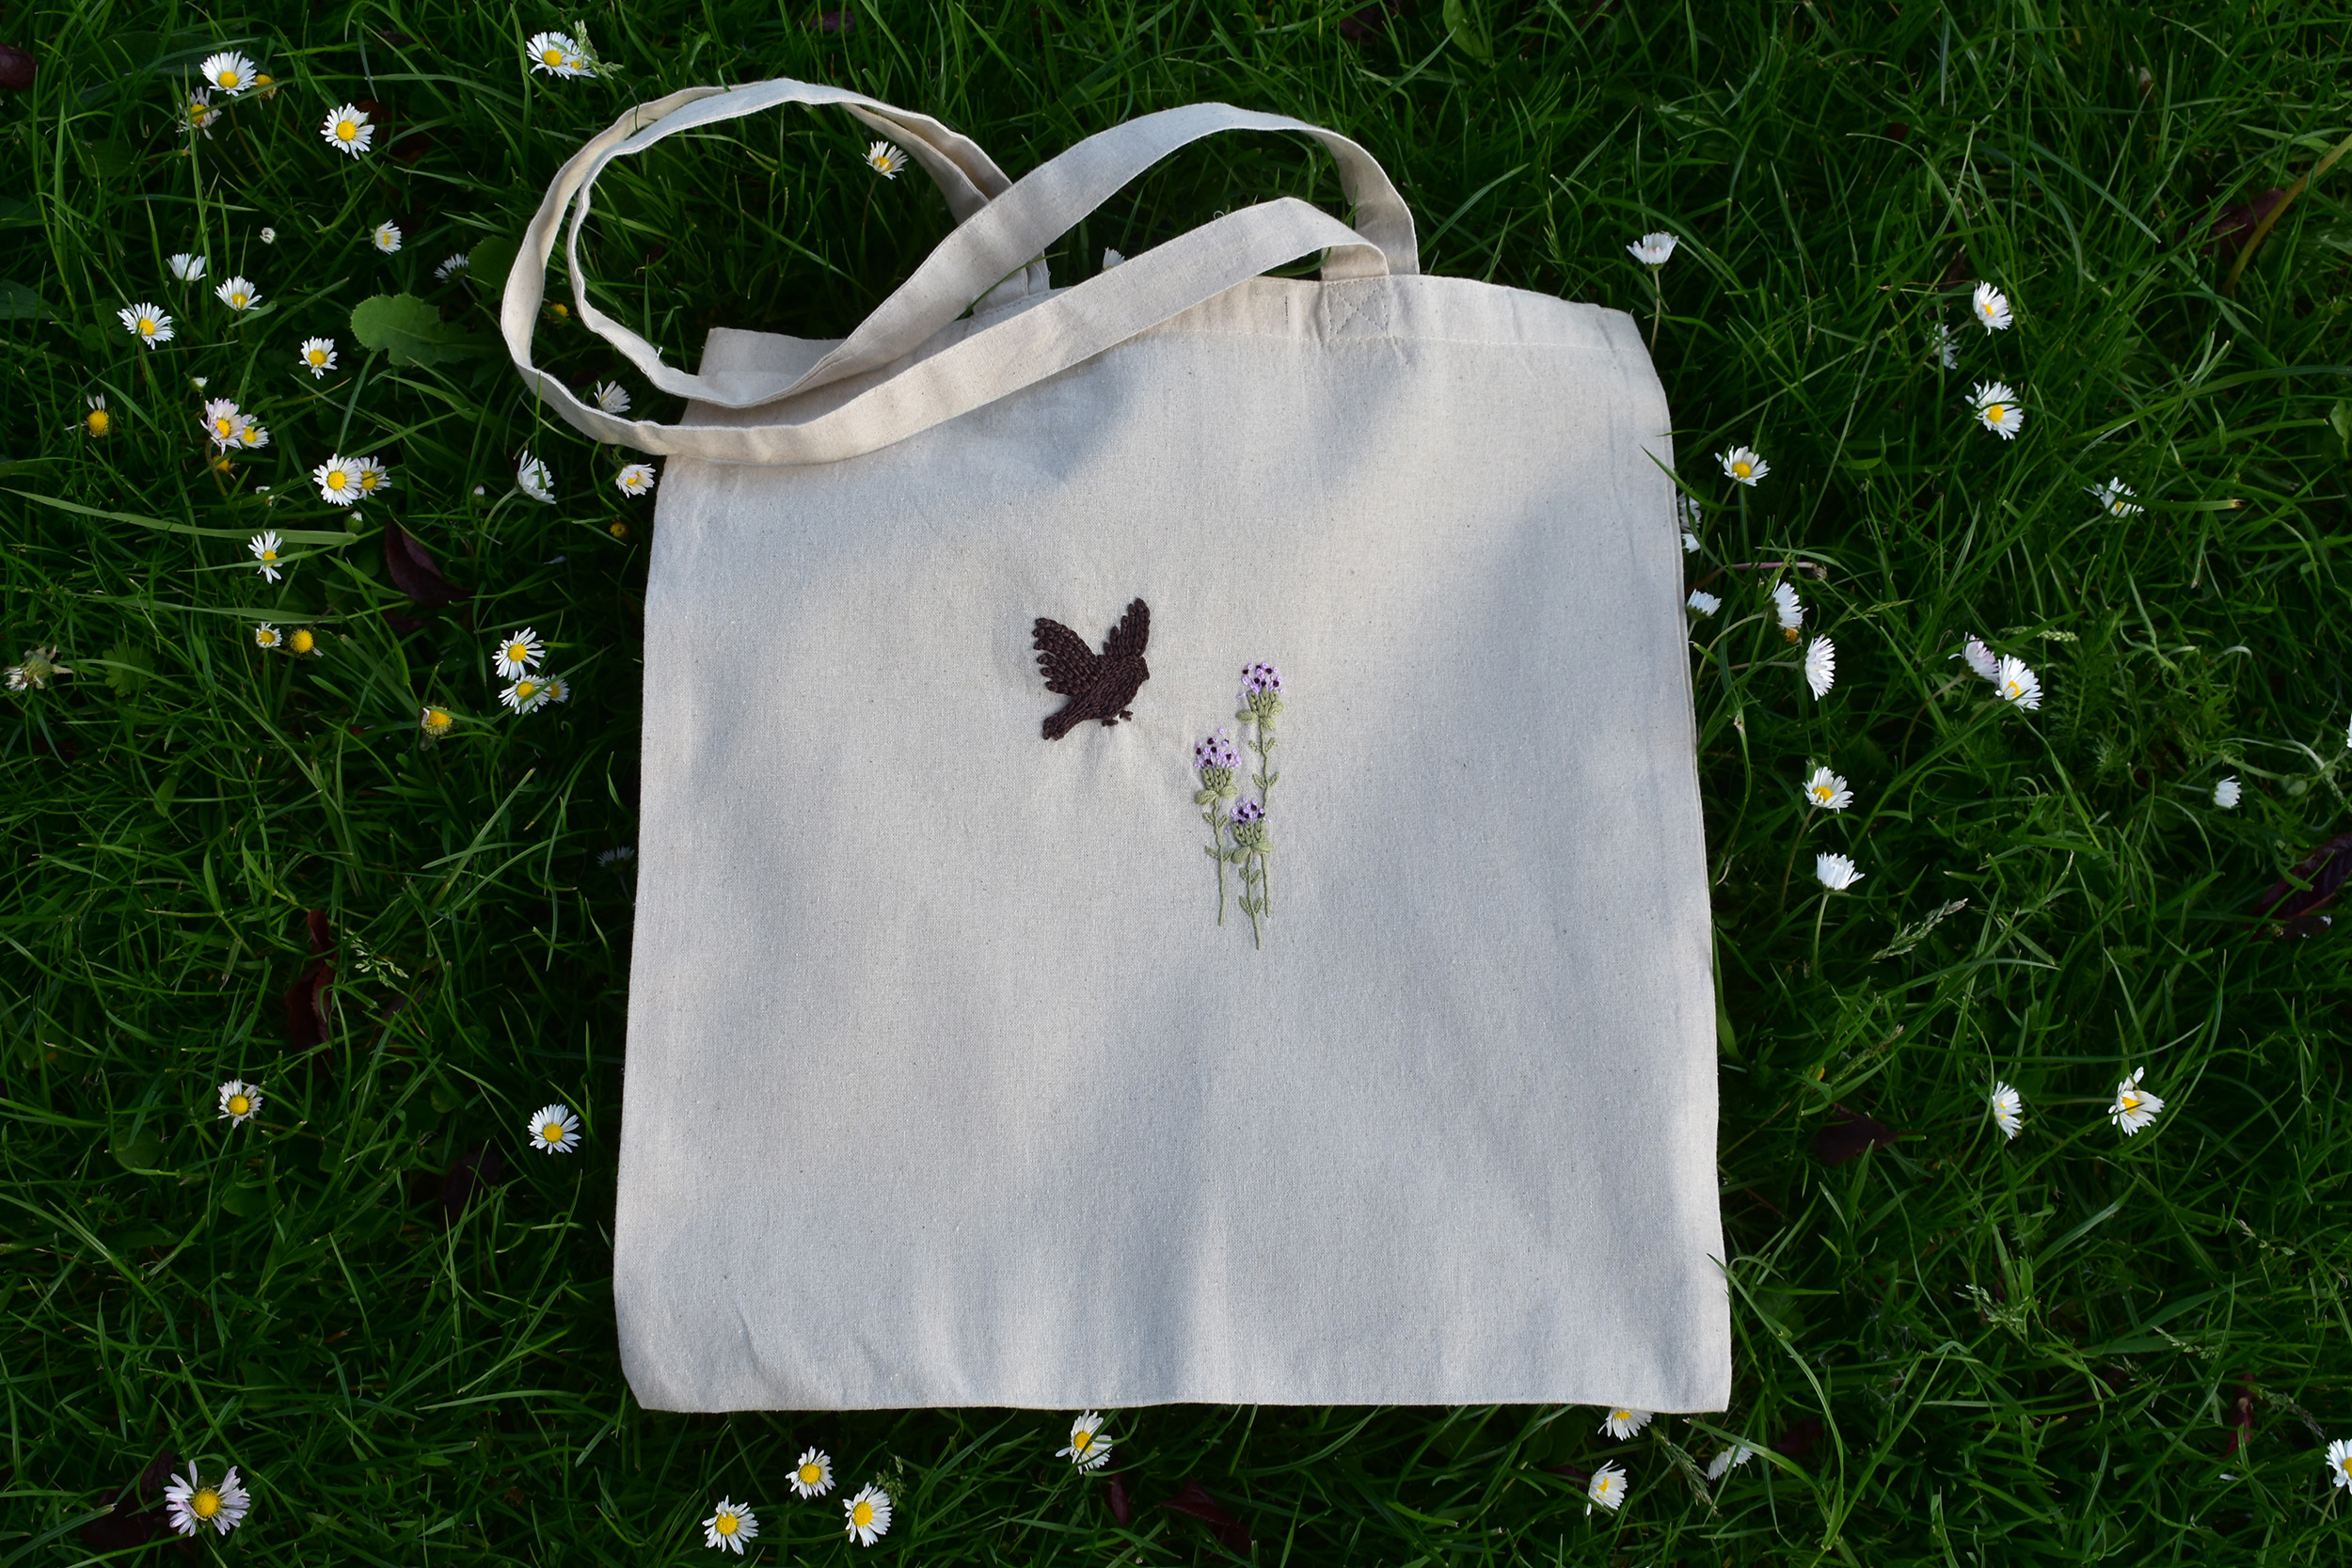 Hand-embroidered tote bag showing a silhouette of a goldfinch to the left of three common knapweed plants.